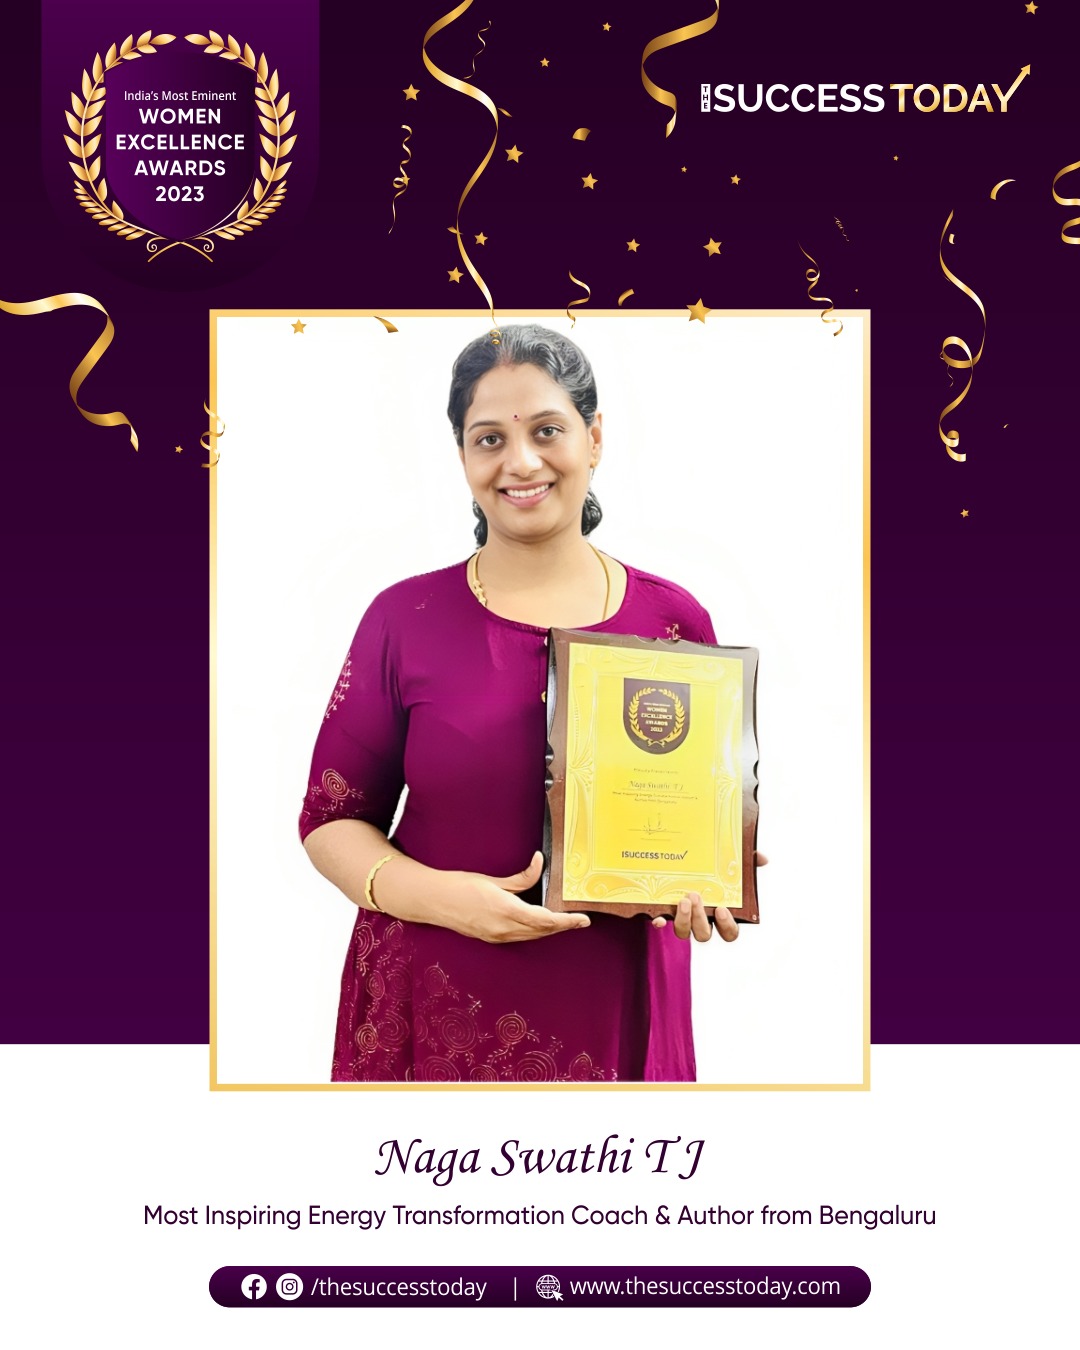 Naga Swathi T J | Award-winning Author, Prominent Energy Transformation Coach and HXM Expert in top MNC - The Success Today - Success Today - thesuccesstoday